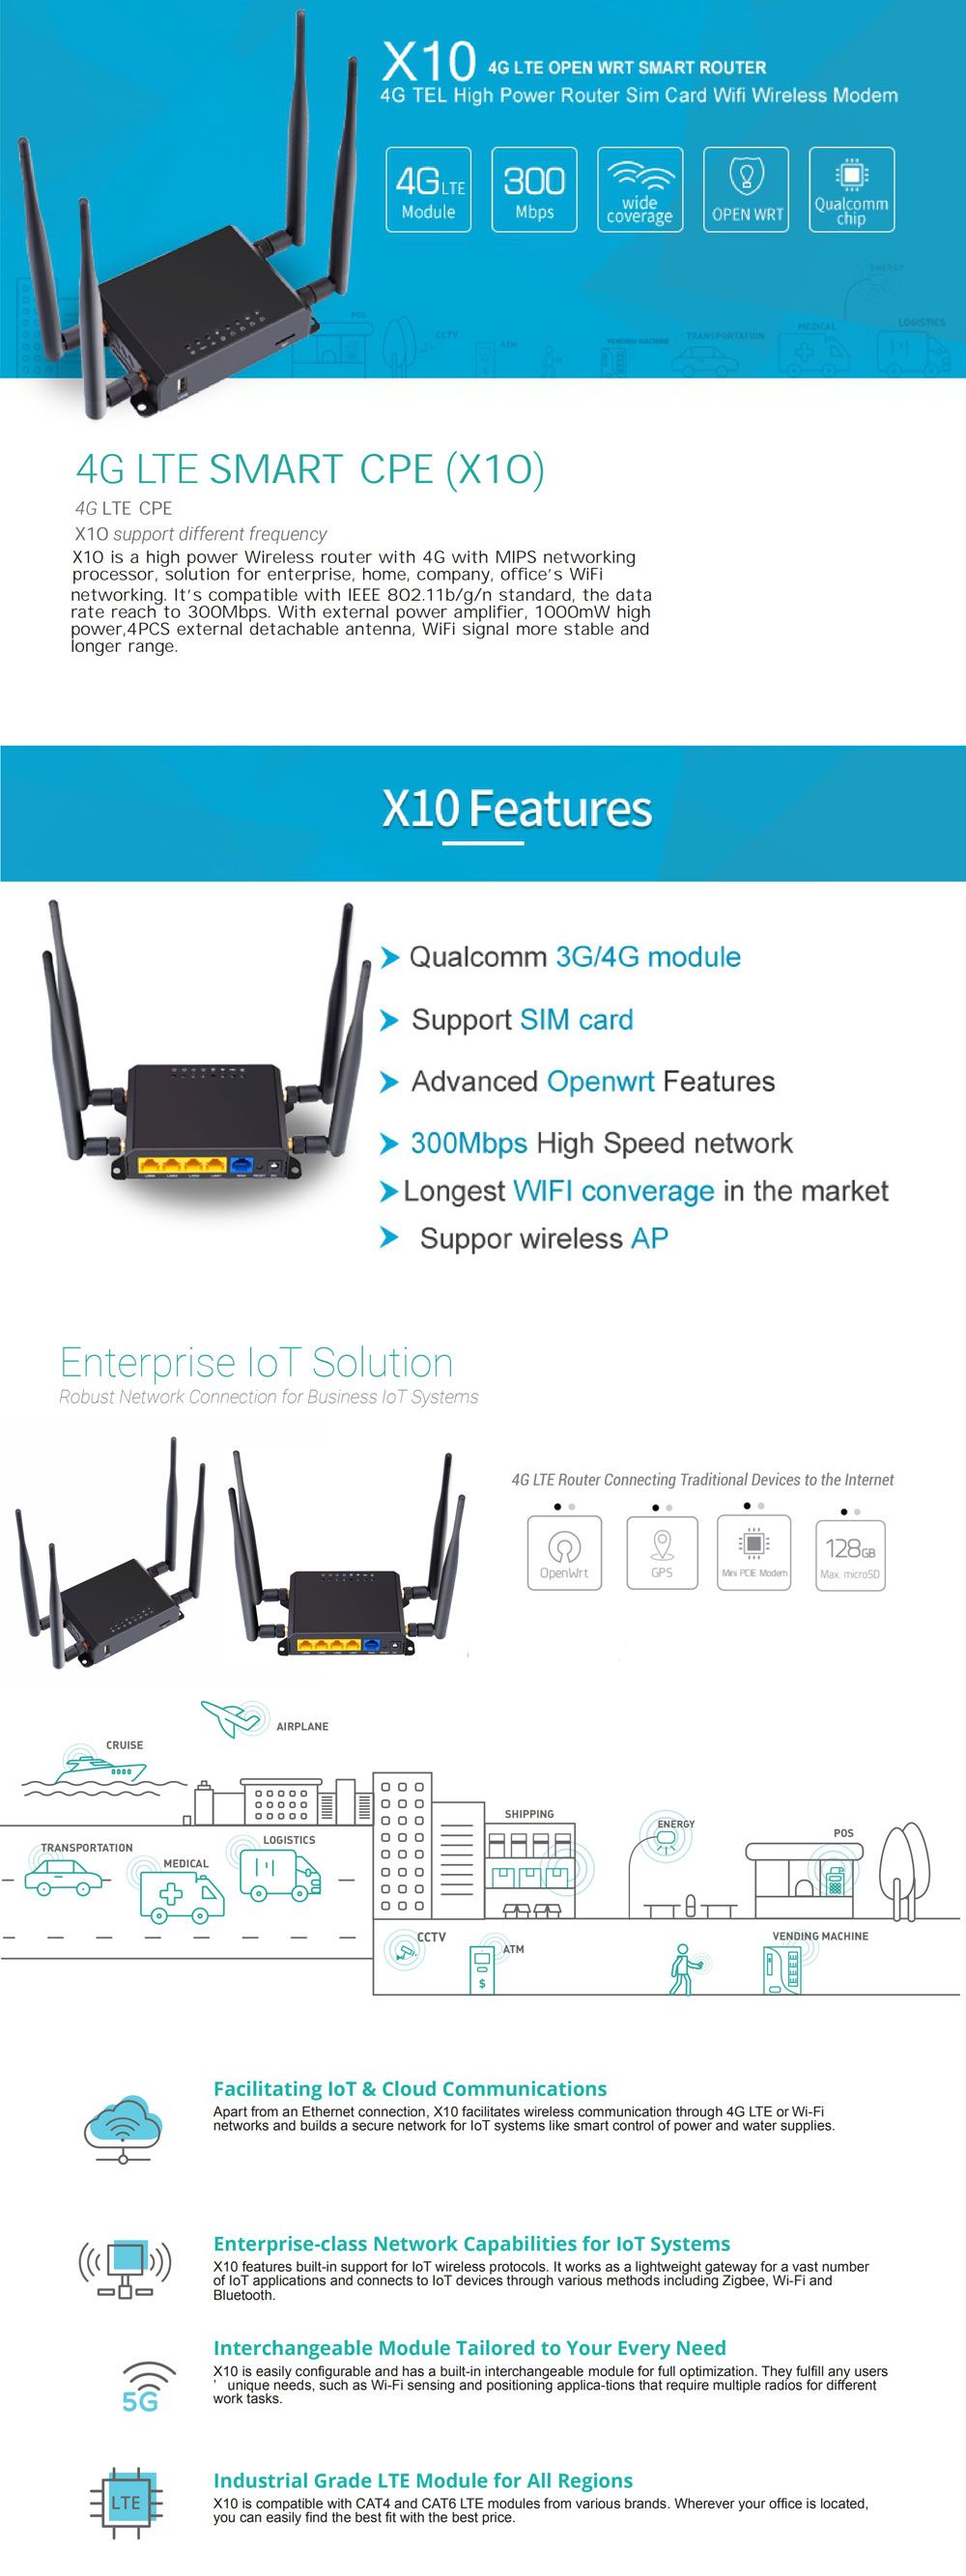 MechZone-X10-Frequency-Europe-and-Asia-Pacofic-Australia-Version-4G-LTE-OPEN-WRT-Smart-CPE-Router-Si-1596374